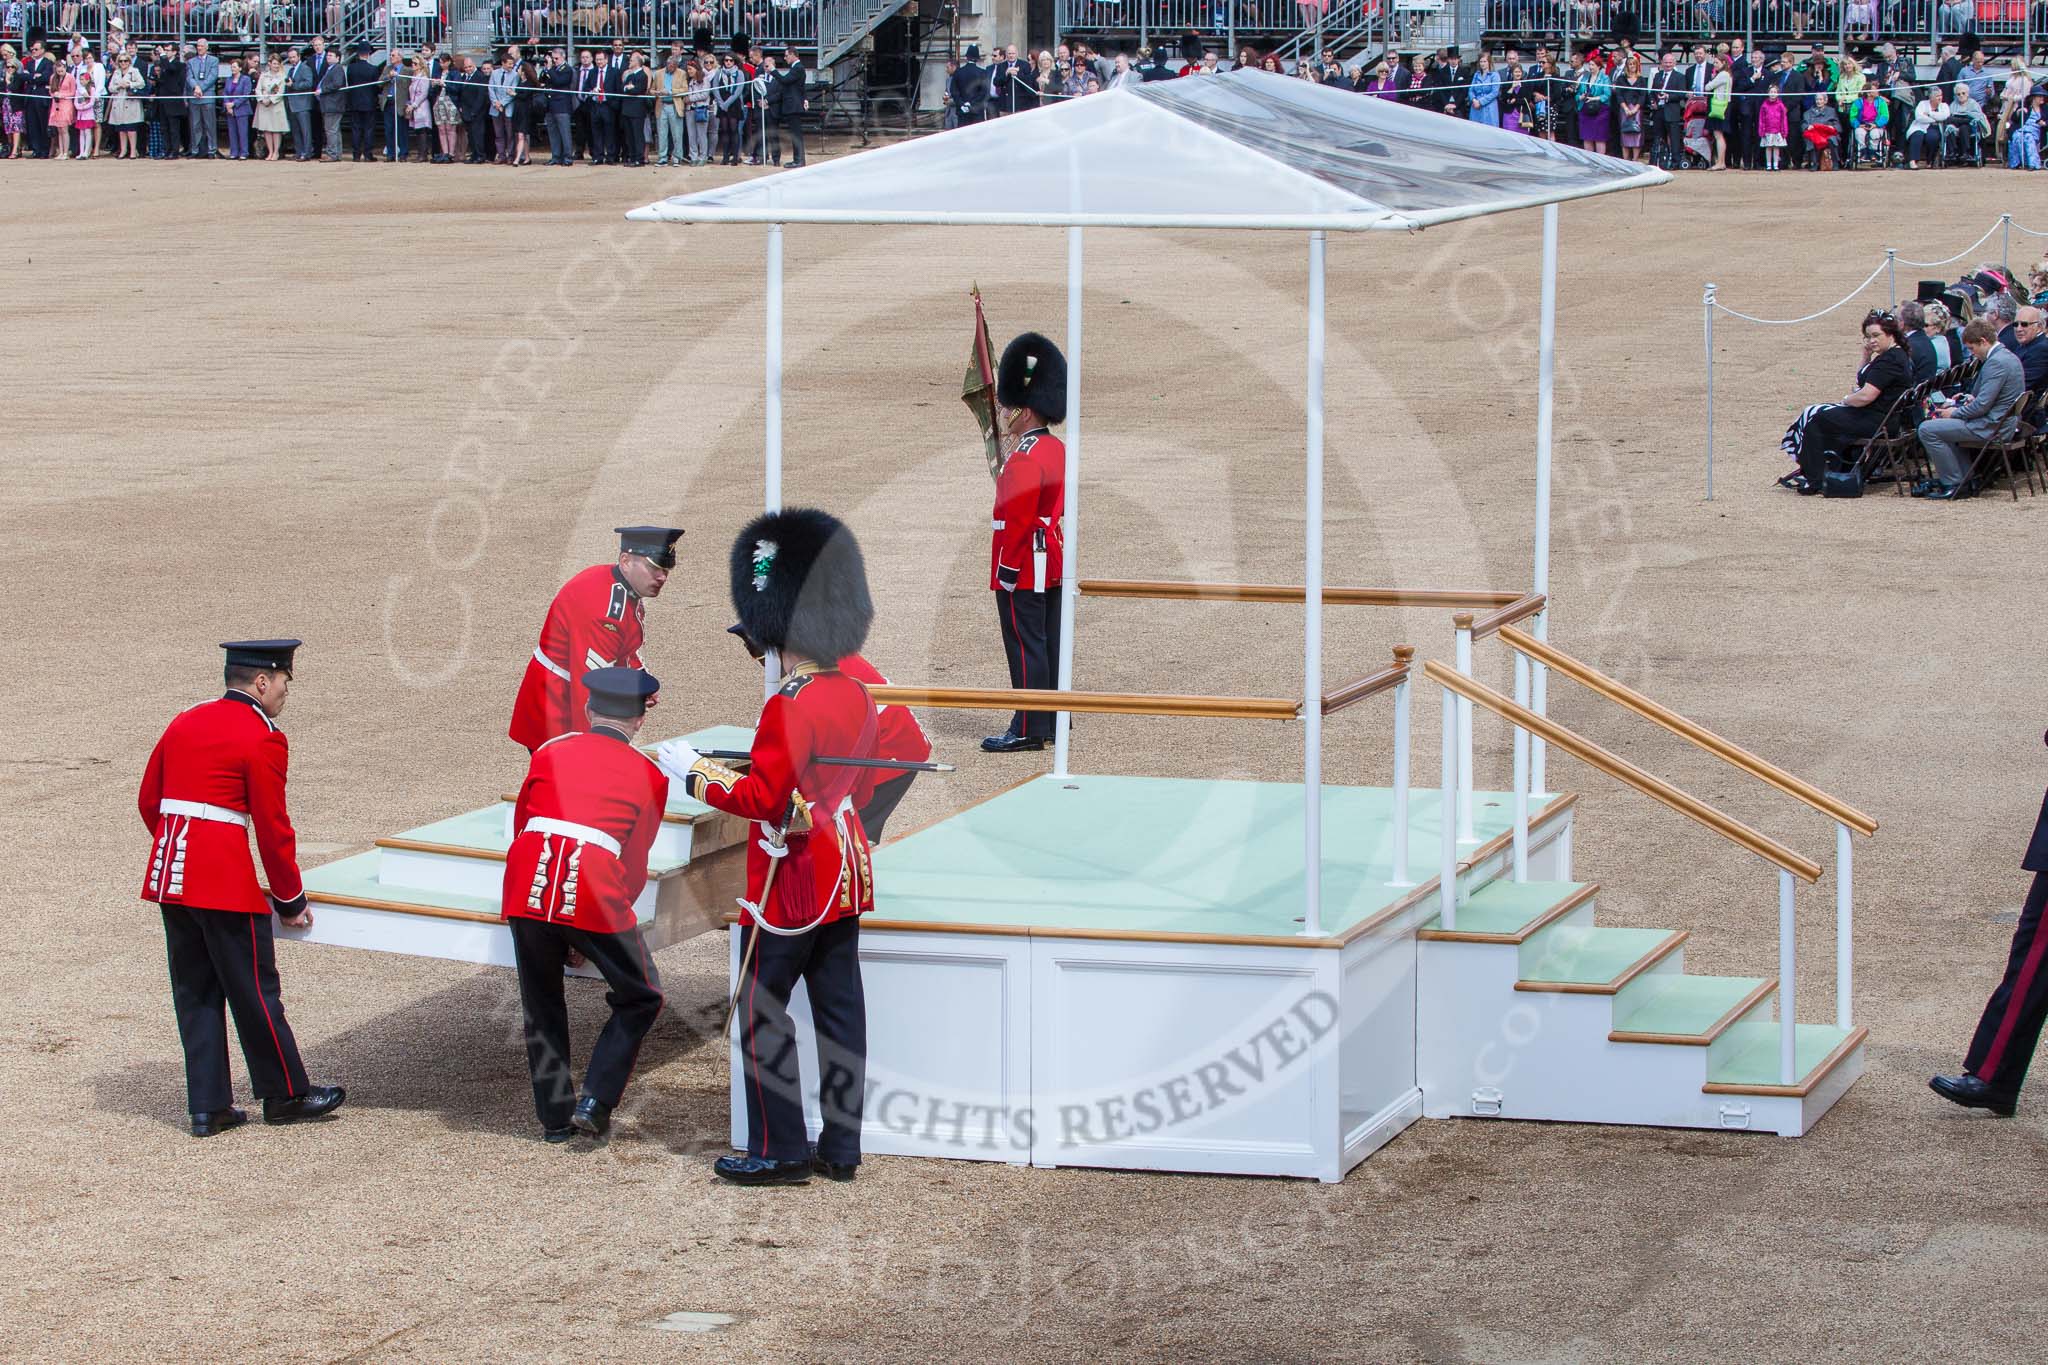 Trooping the Colour 2013: The dais, the saluting platform for HM The Queen, is in the final stages of assembly, shortly before the arrival of the Royal Procession. Image #224, 15 June 2013 10:54 Horse Guards Parade, London, UK